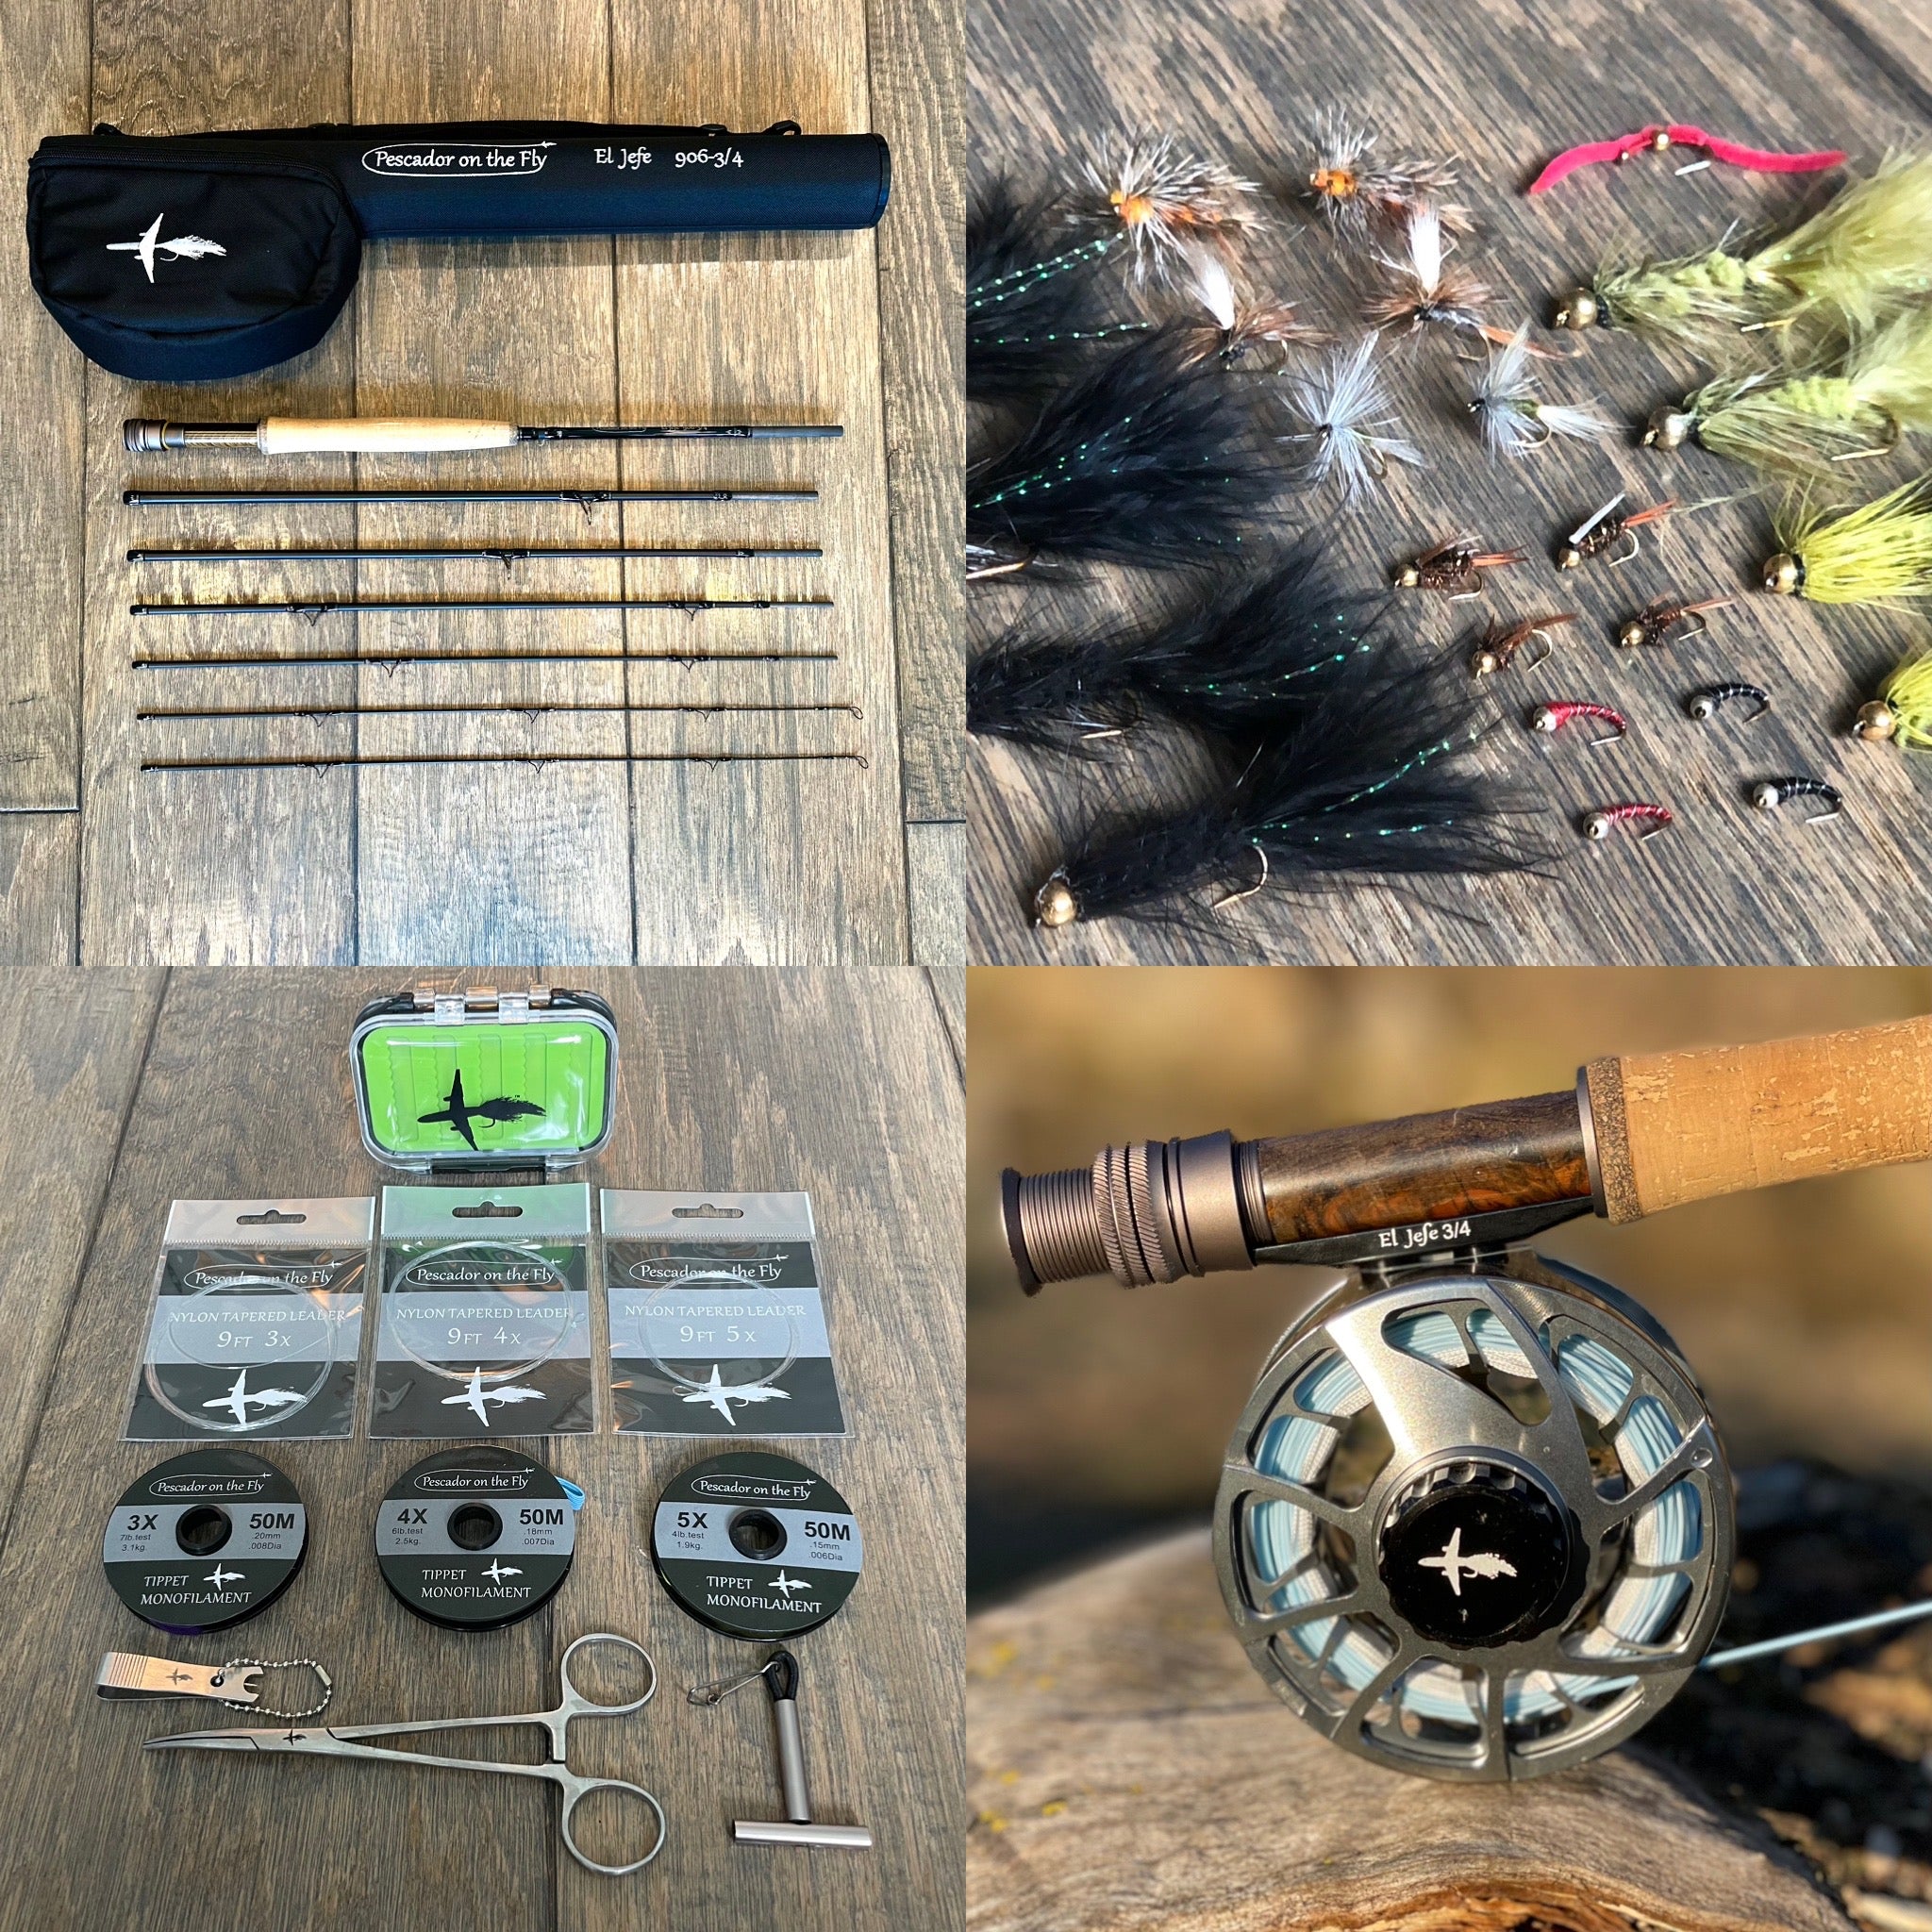 Wild Water Fly Fishing, 9 Foot, 9 and 10 Weight Rod and Reel, Combo Kit,  Saltwater Flies